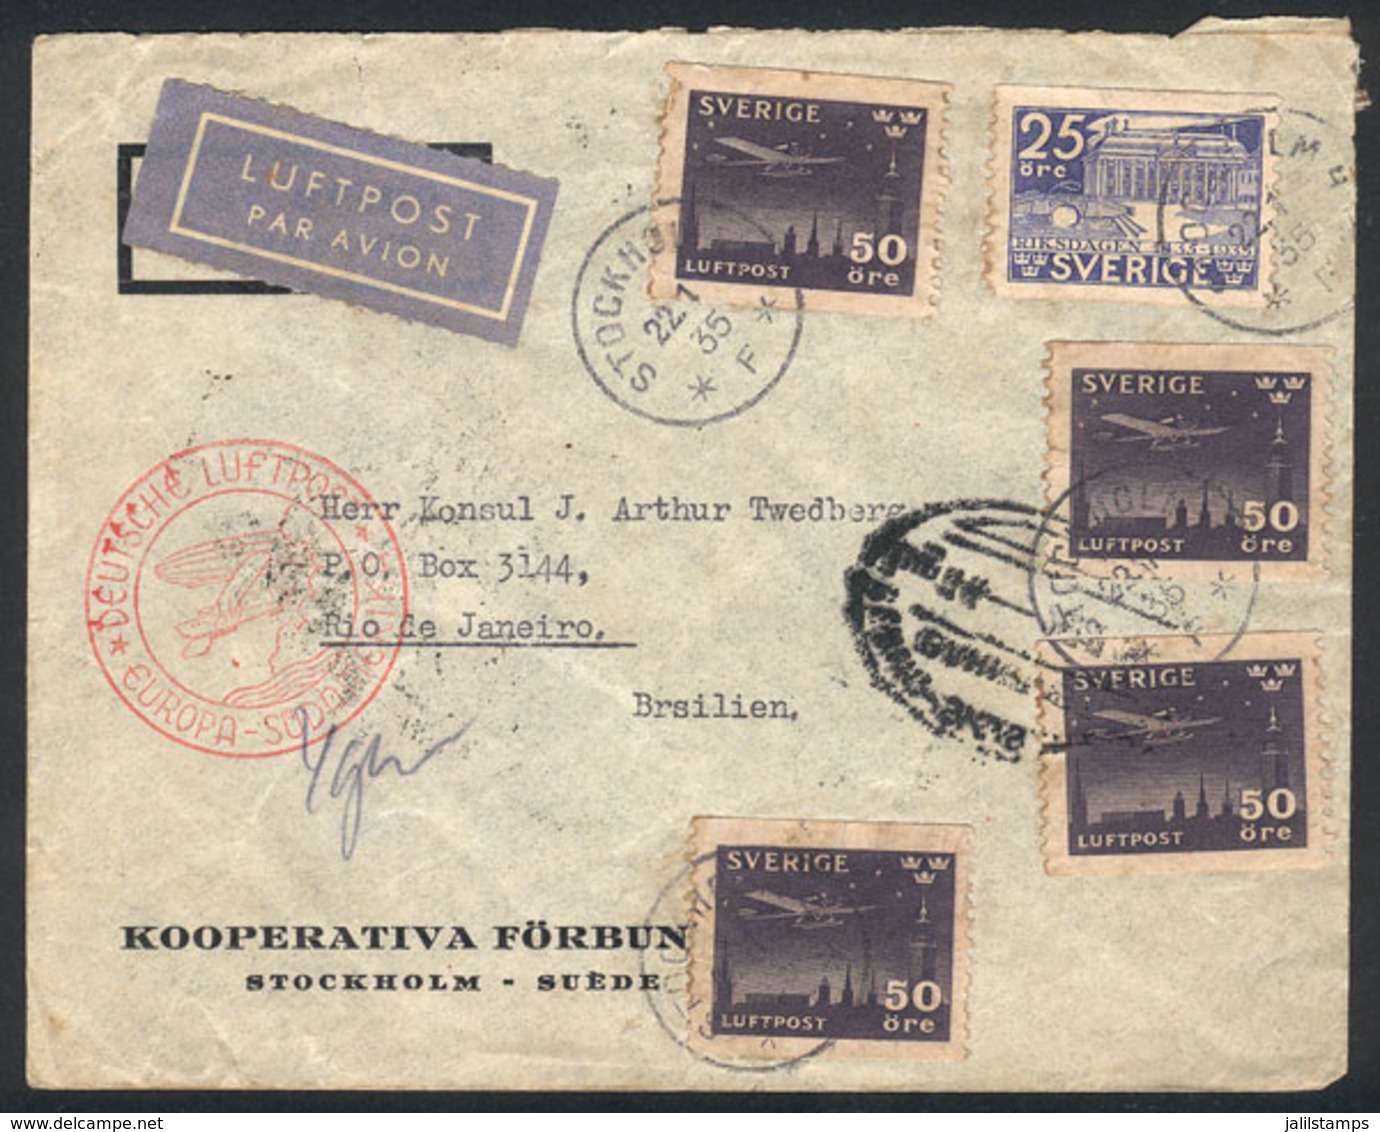 SWEDEN: 22/JA/1935 Stockholm - Rio De Janeiro: Airmail Cover Sent Via Germany (DLH), Very Attractive! - Lettres & Documents